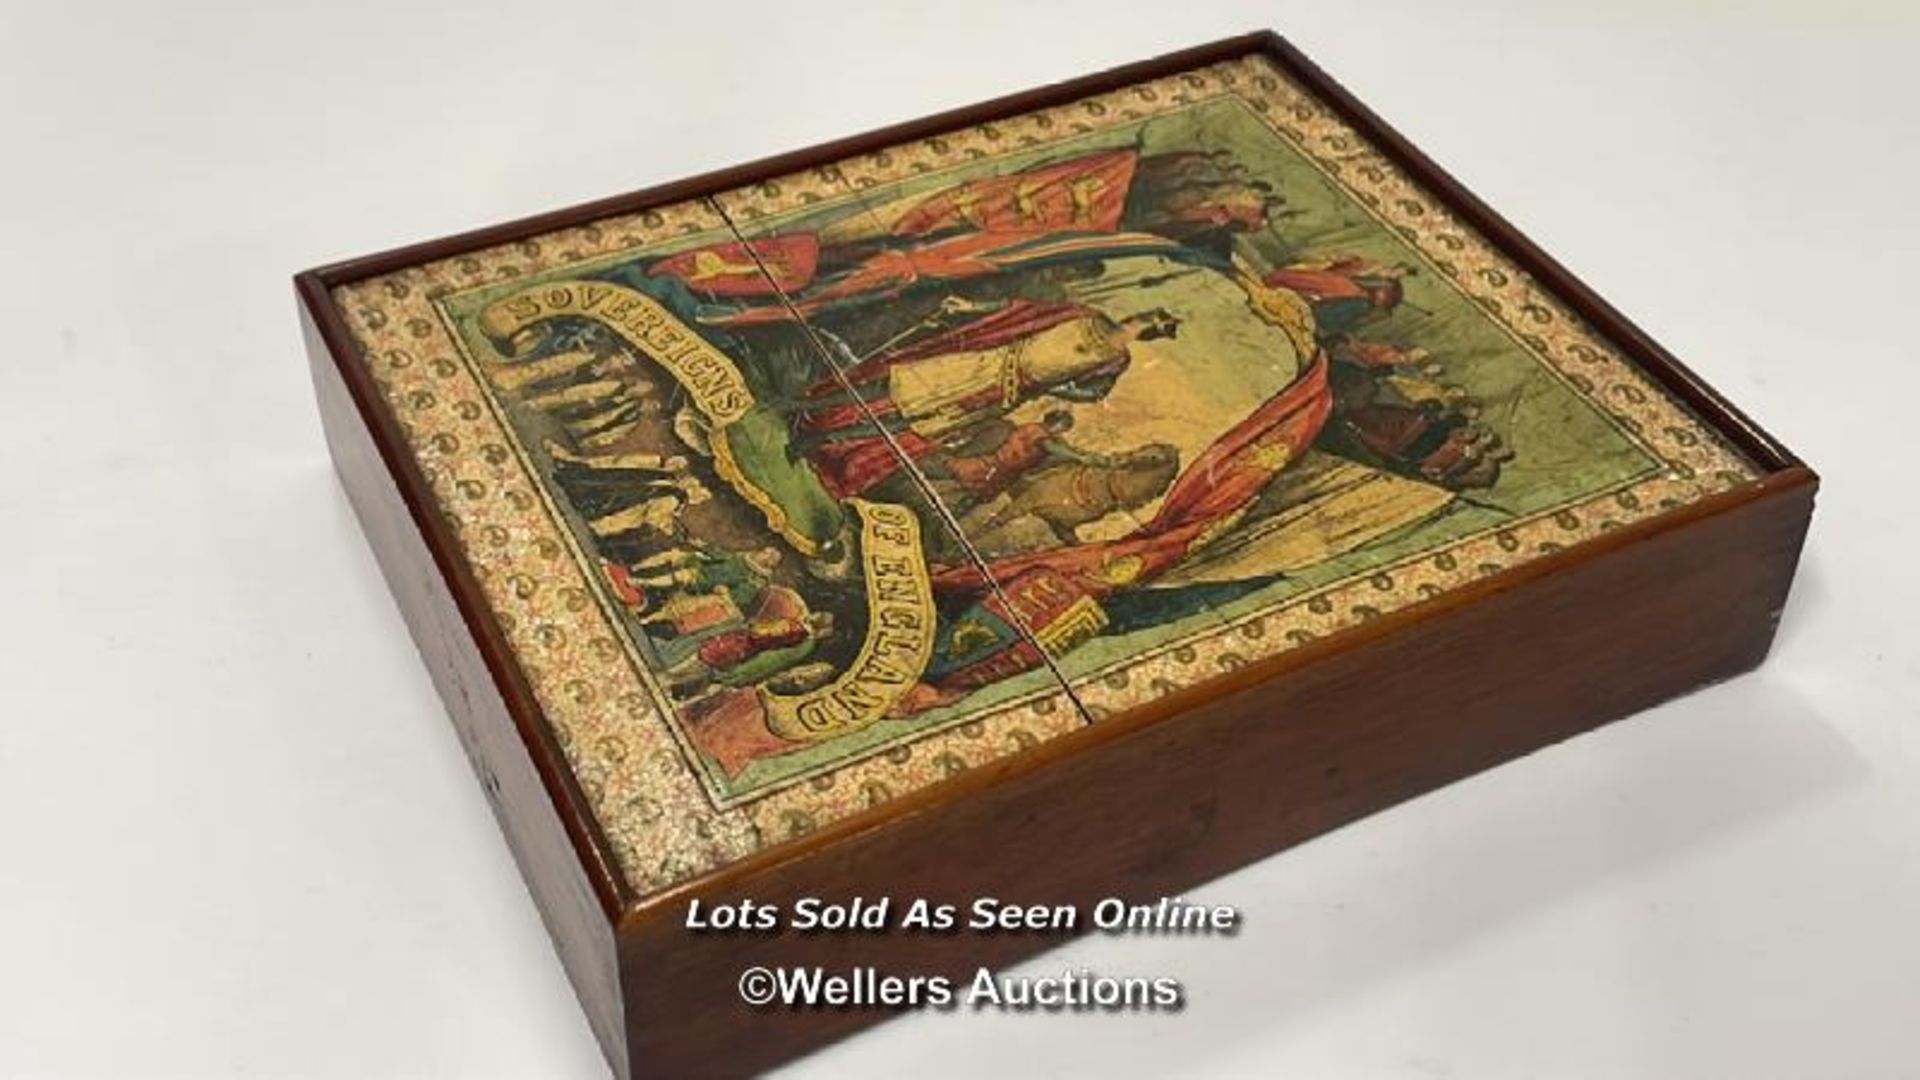 Rare Victorian wooden block set "Sovereigns of England", 36 piece set of coloured illustrations - Image 5 of 5